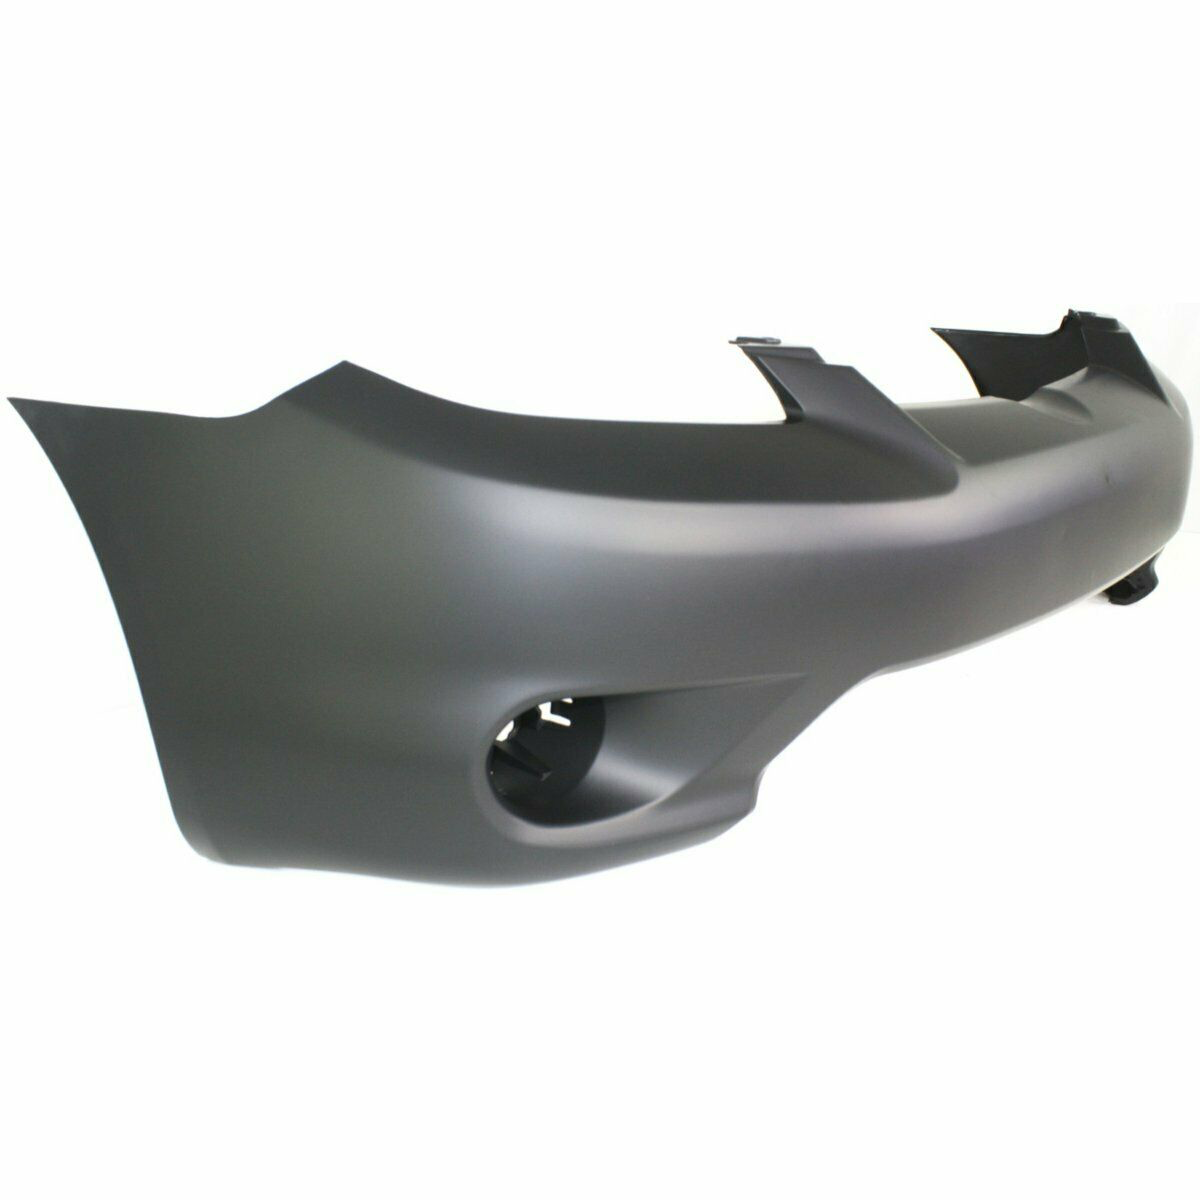 2005-2008 Toyota Matrix Base Front Bumper Painted to Match